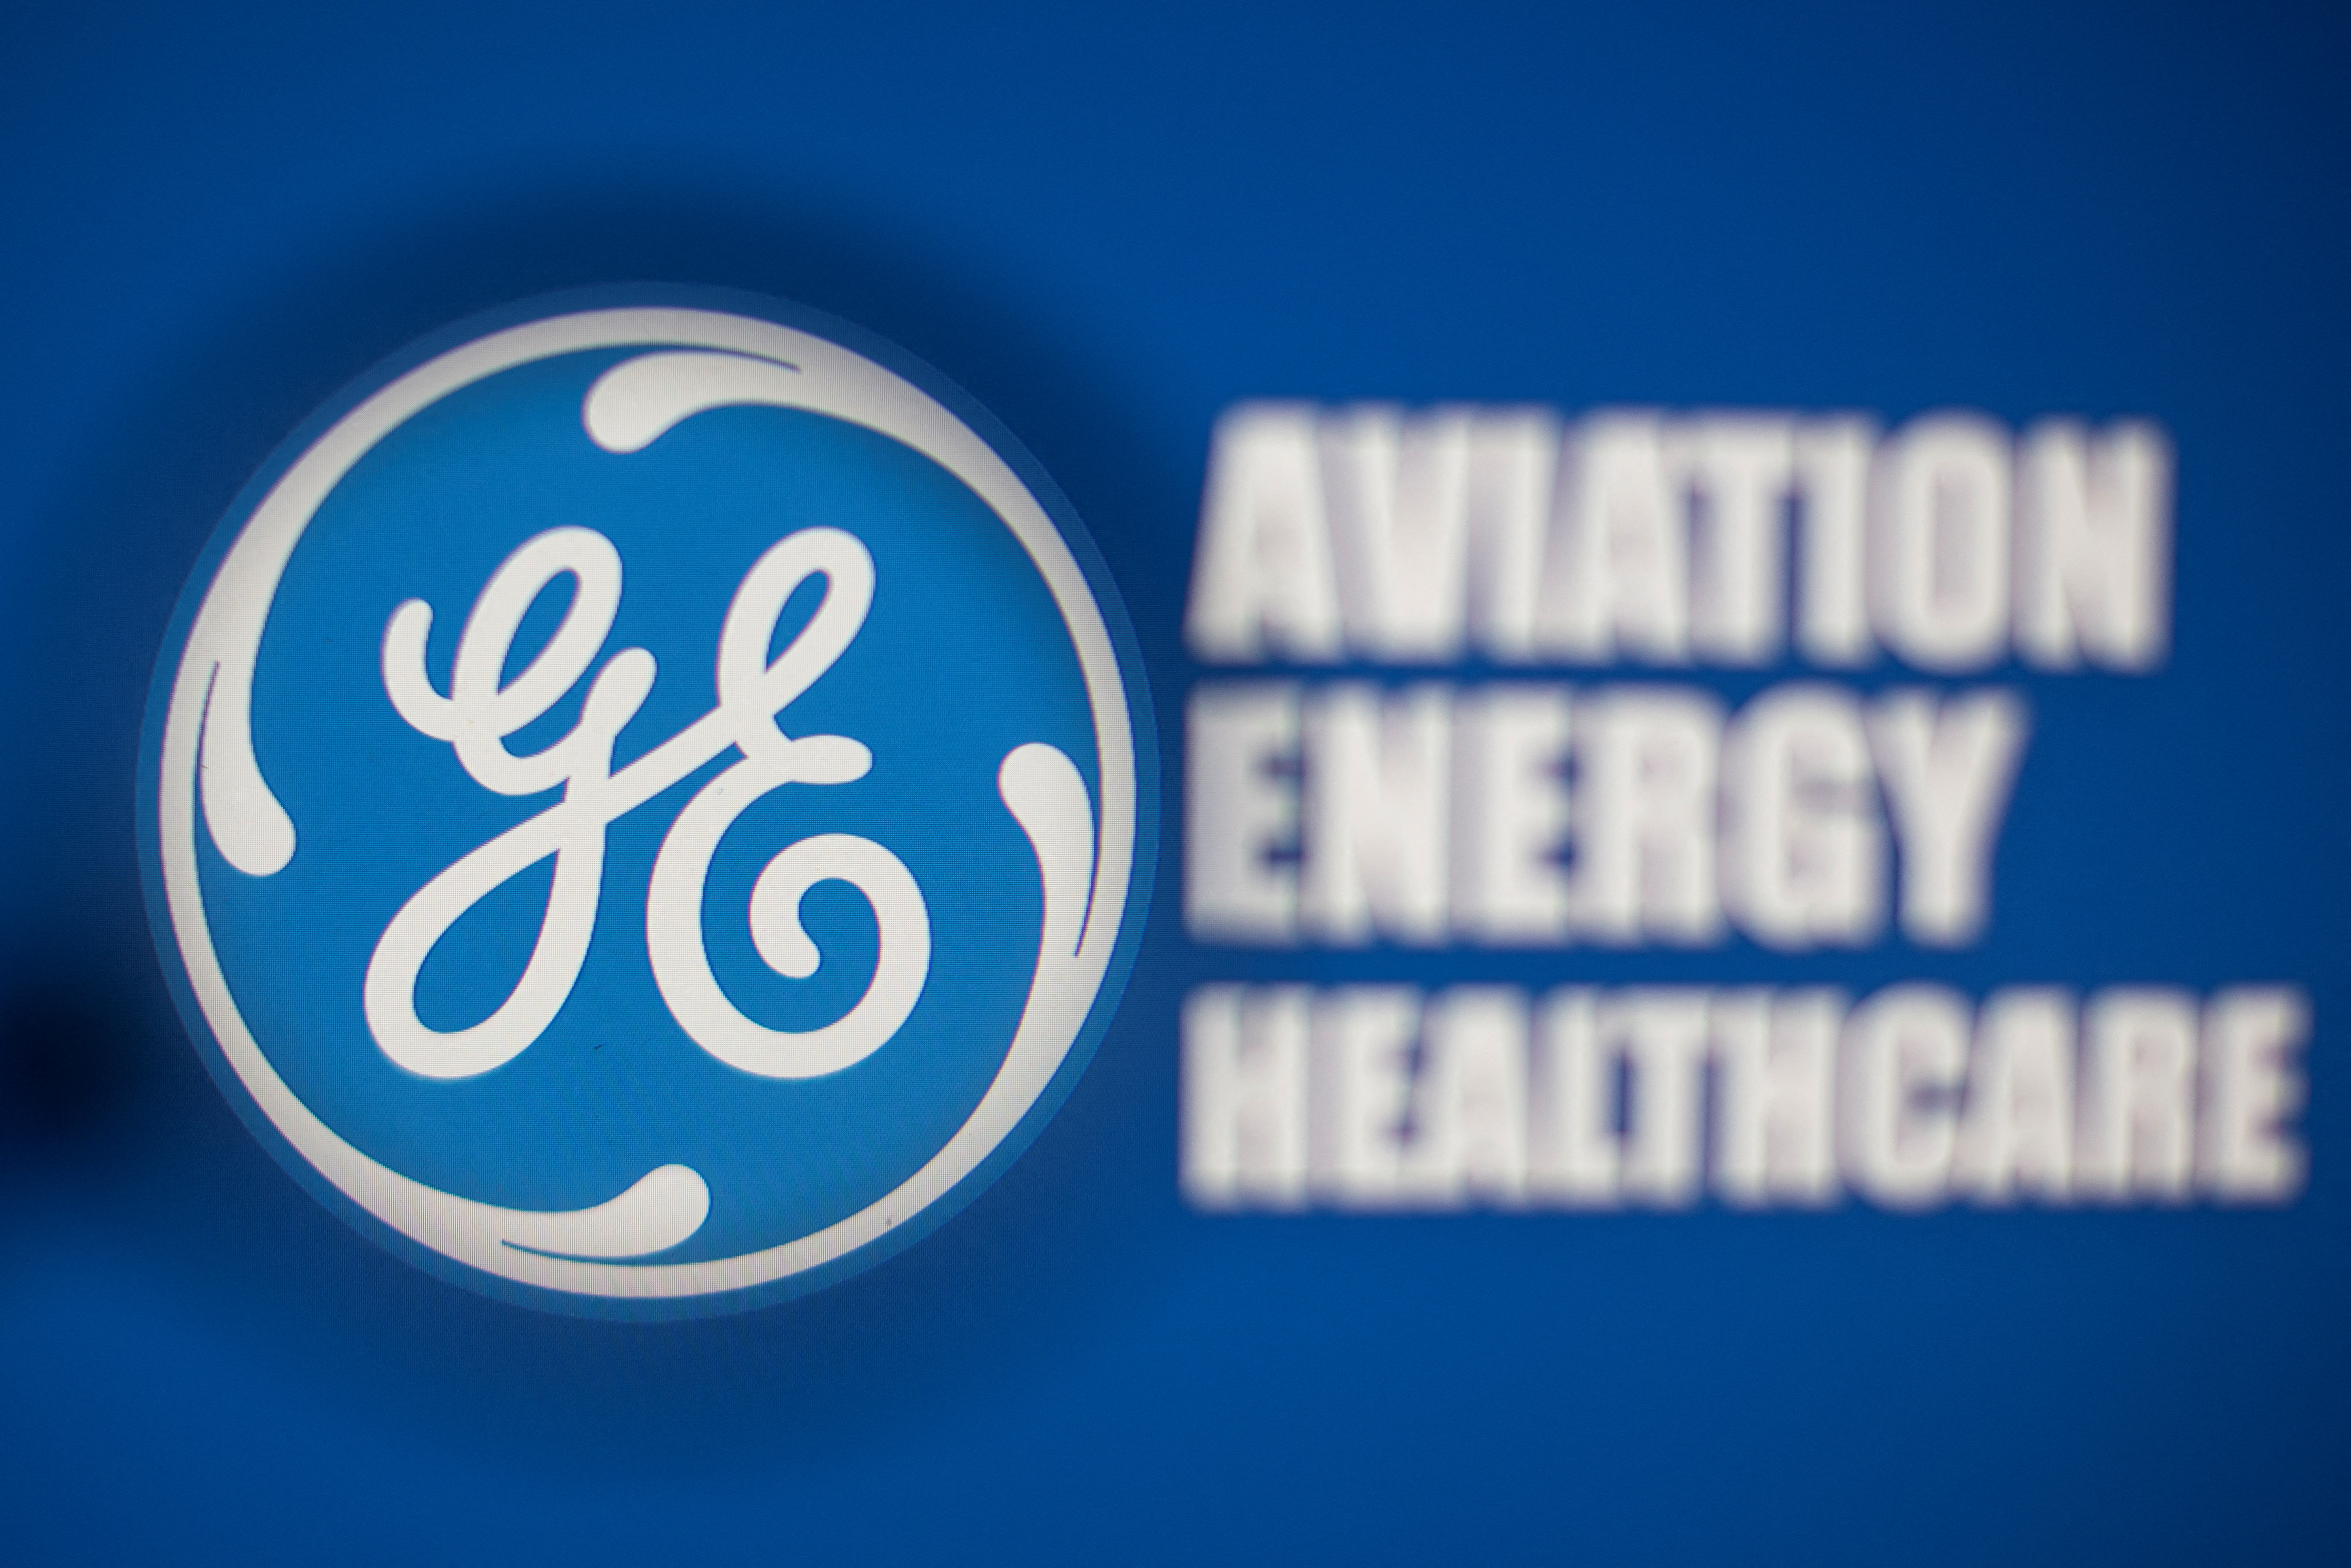 General Electric logo is seen through magnifier in front of displayed Aviation, Energy, Healthcare words in this illustration taken